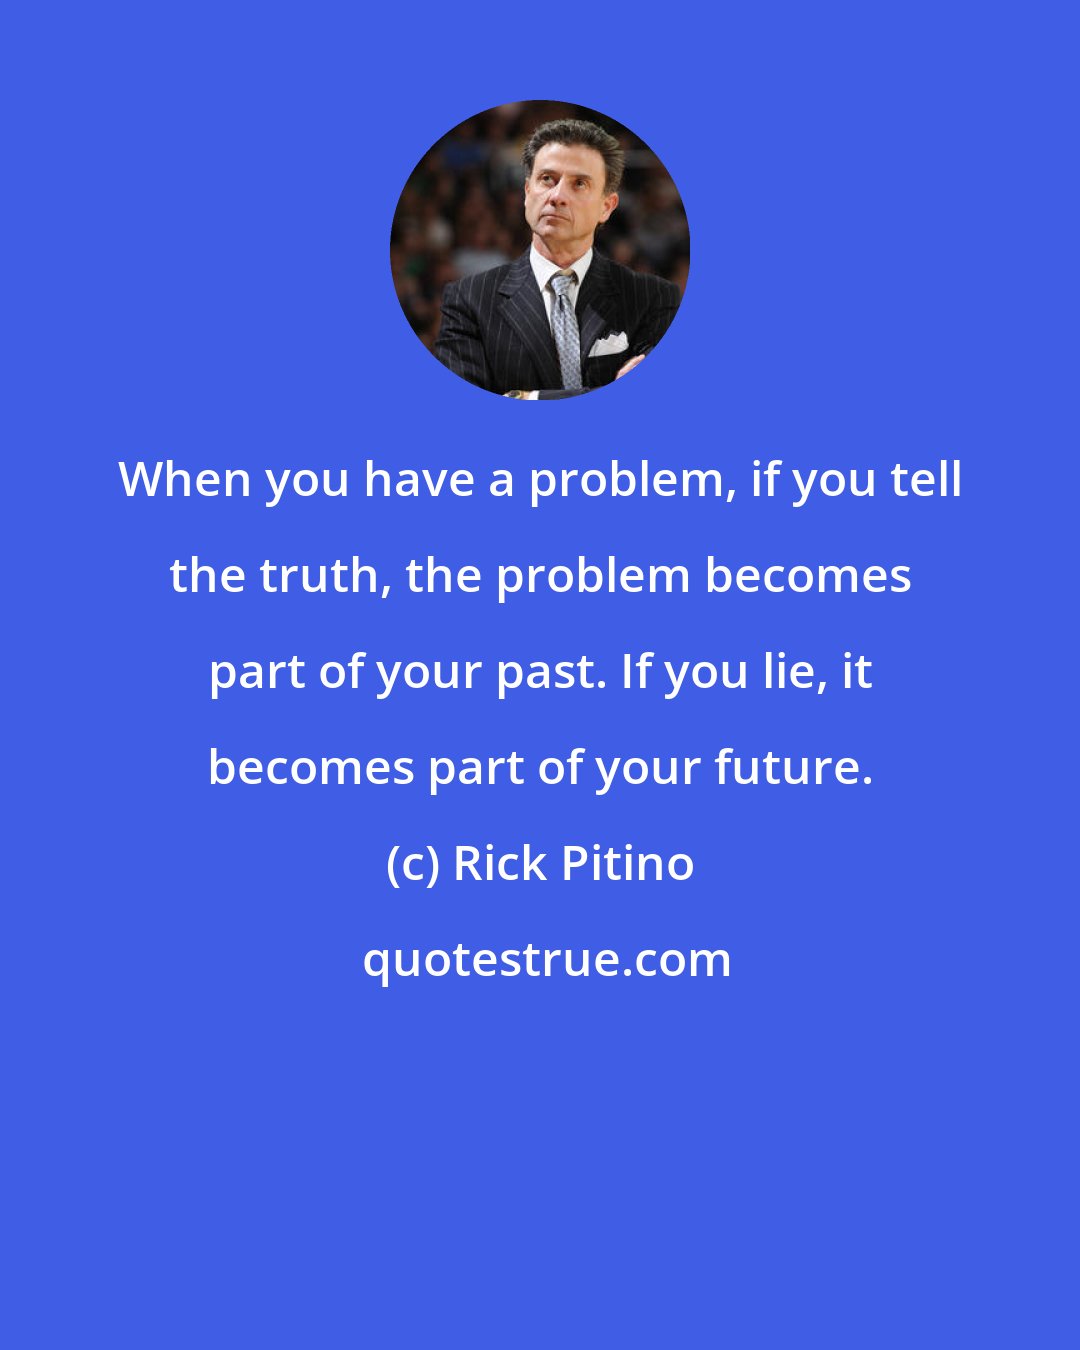 Rick Pitino: When you have a problem, if you tell the truth, the problem becomes part of your past. If you lie, it becomes part of your future.